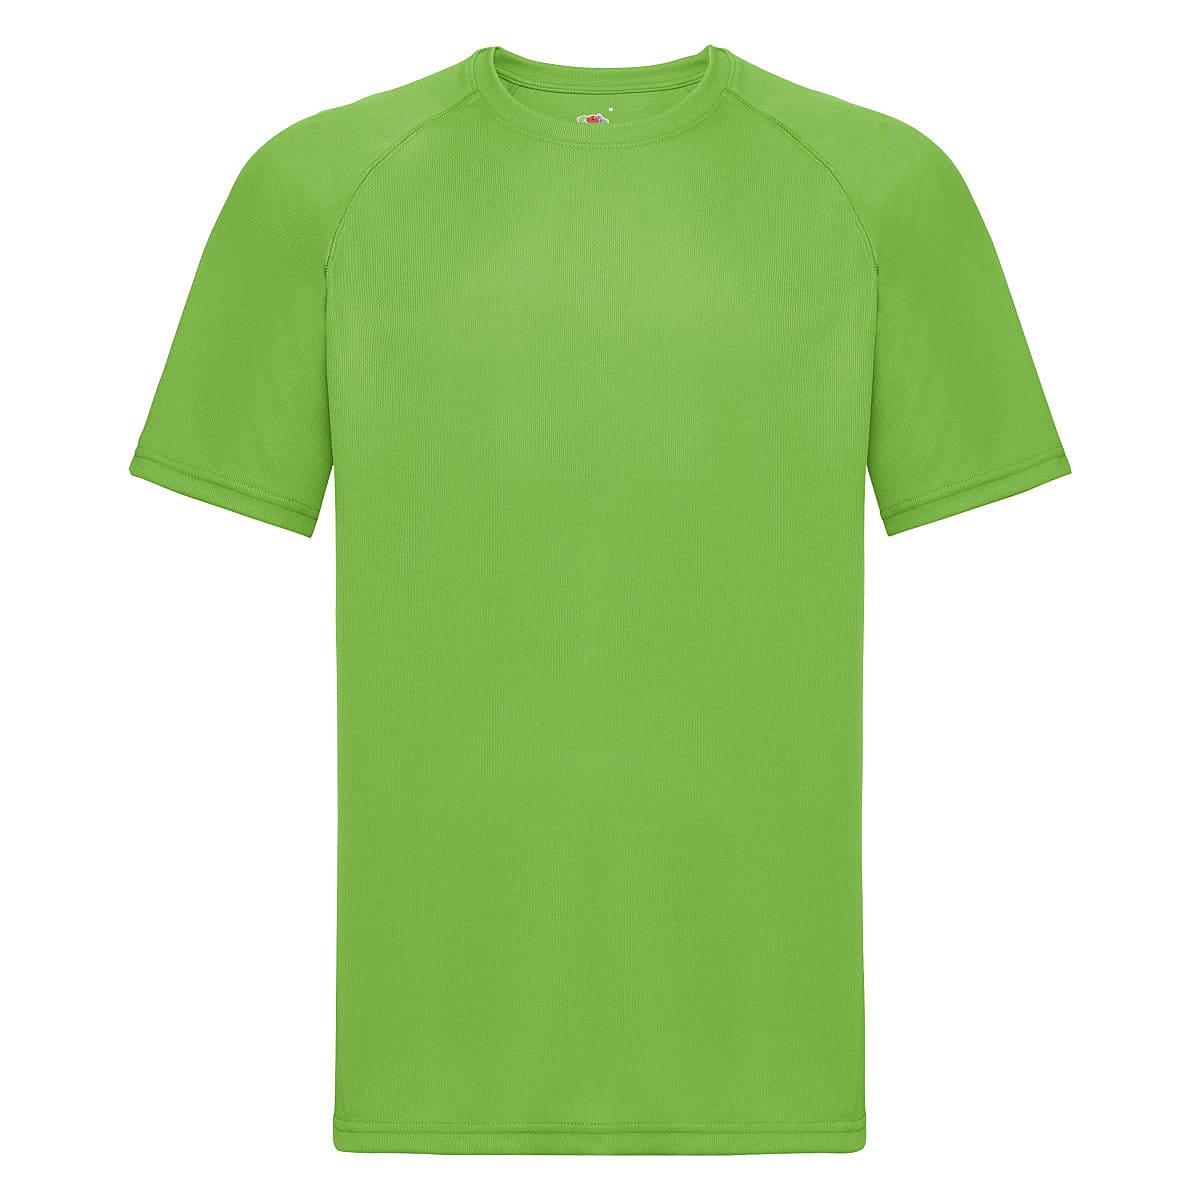 Fruit Of The Loom Mens Performance T-Shirt in Lime (Product Code: 61390)